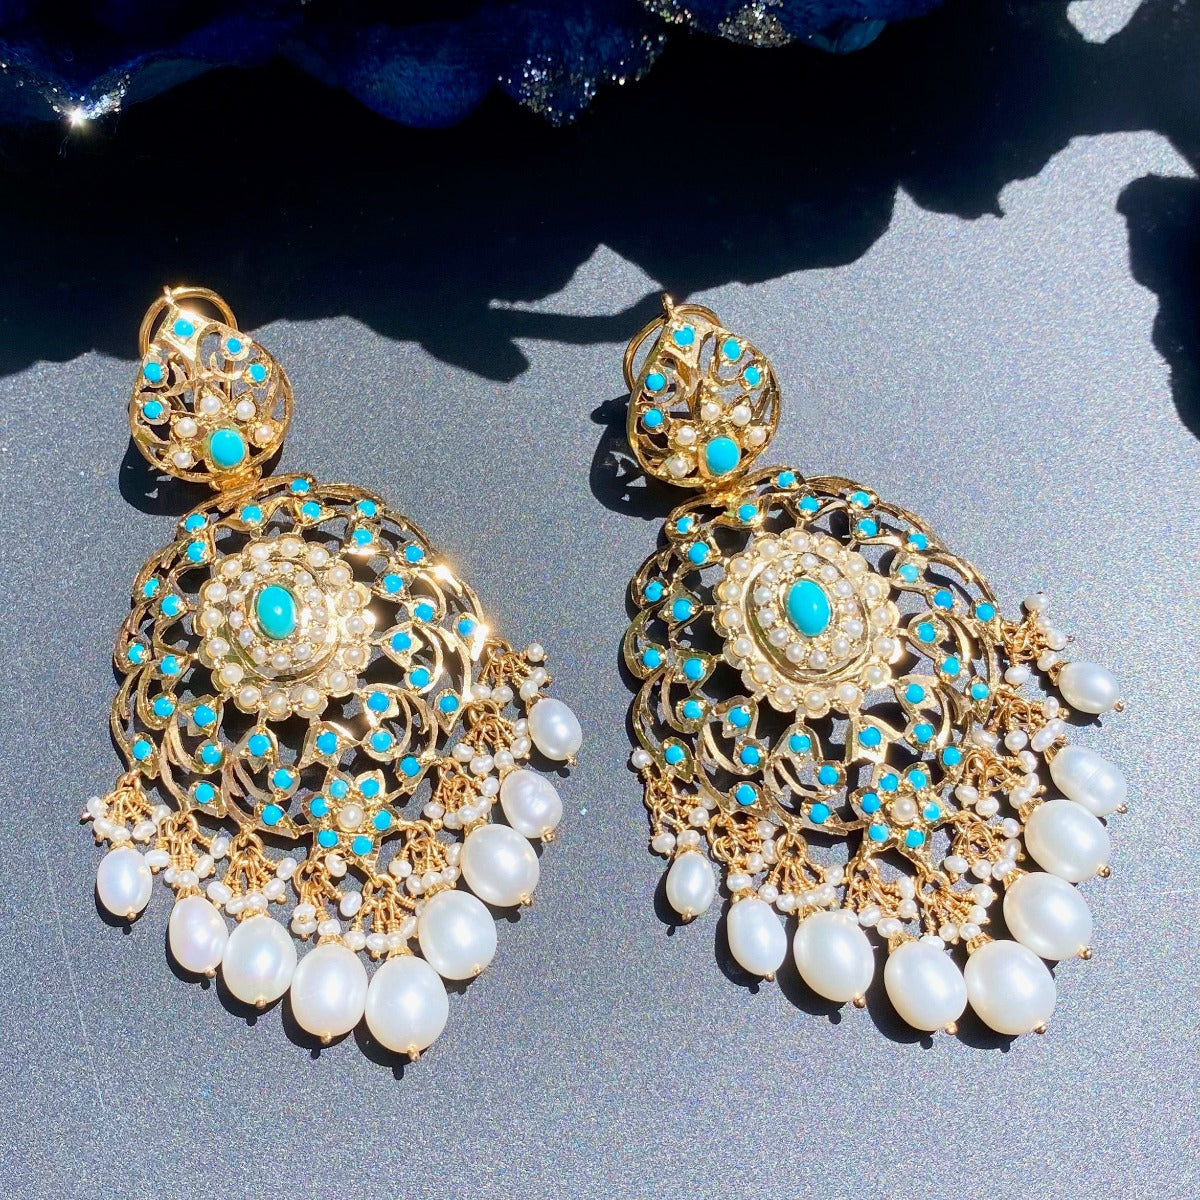 Statement Turquoise Earrings | Vintage Design | Gold Plated on Silver ER 483A